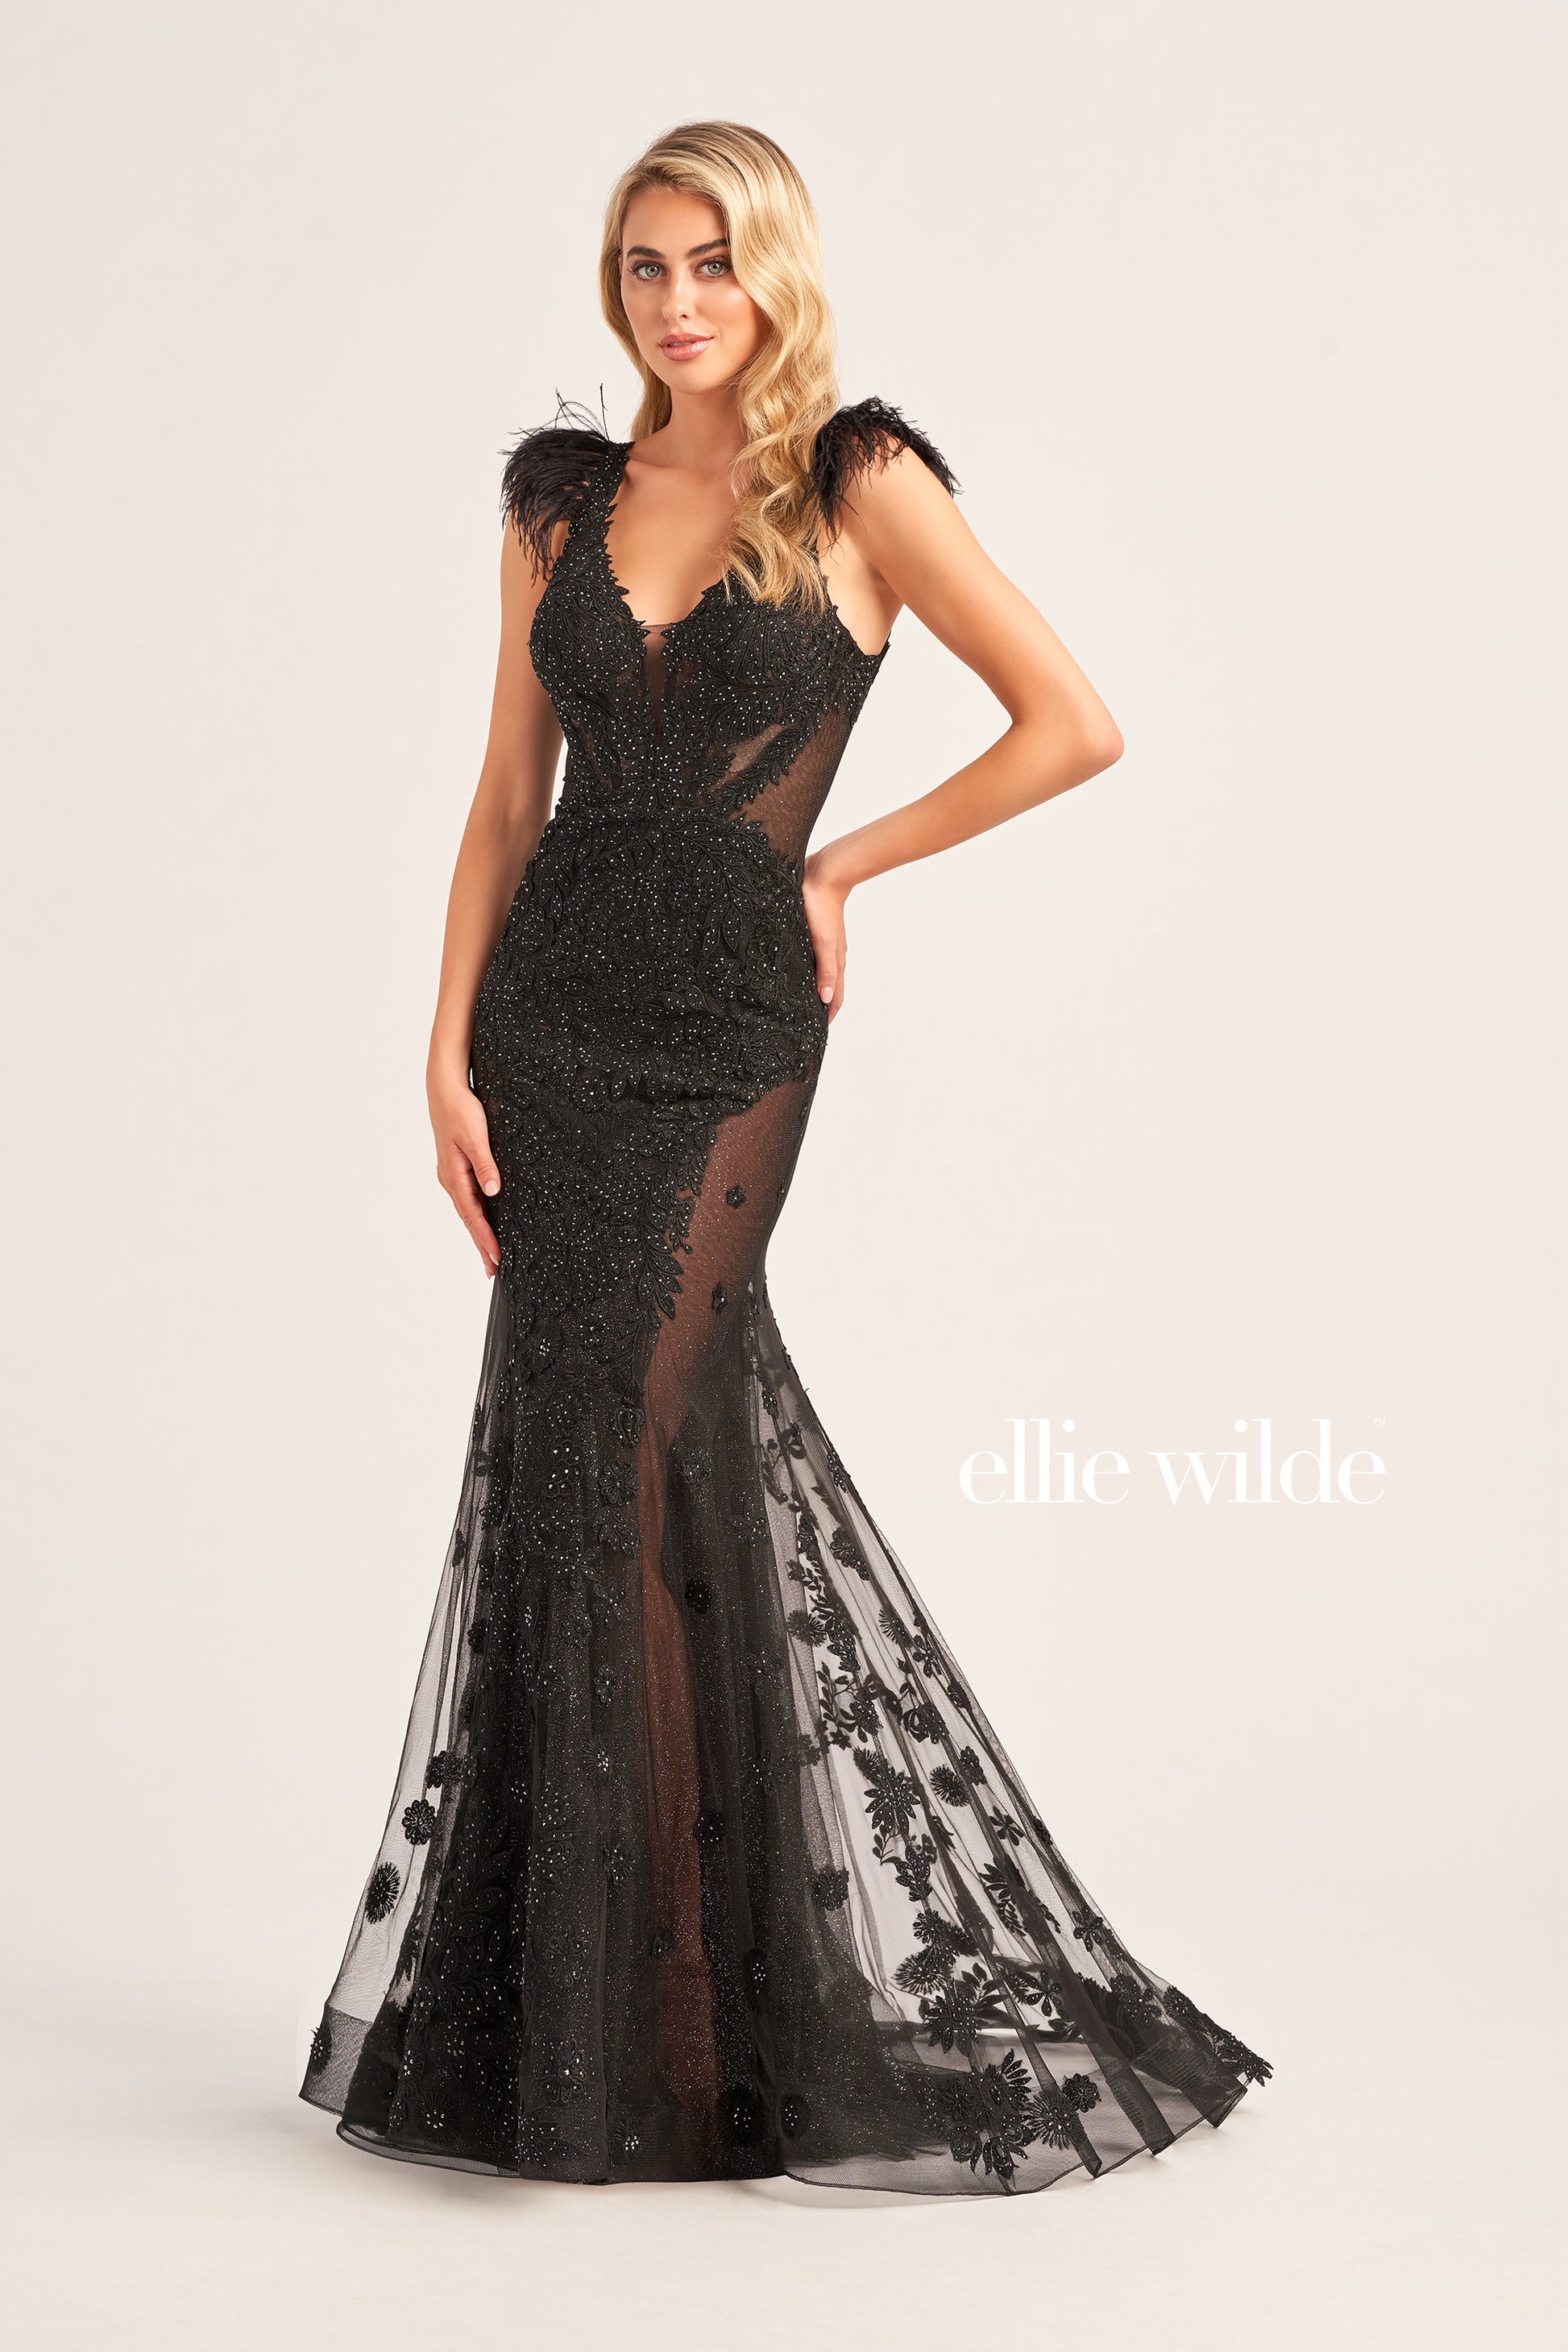 Look dazzling in this Ellie Wilde EW35009 evening gown, crafted with glitter tulle, lace appliques, and stone accents for an eye-catching look. A plunging V-neck, long trumpet silhouette, and detachable feather cap sleeves add to the glamour. The natural waistline and side mesh inset complete the look.  COLOR: BLACK, EMERALD, SAGE, STRAWBERRY, BLUEBELL SIZE: 00 - 20